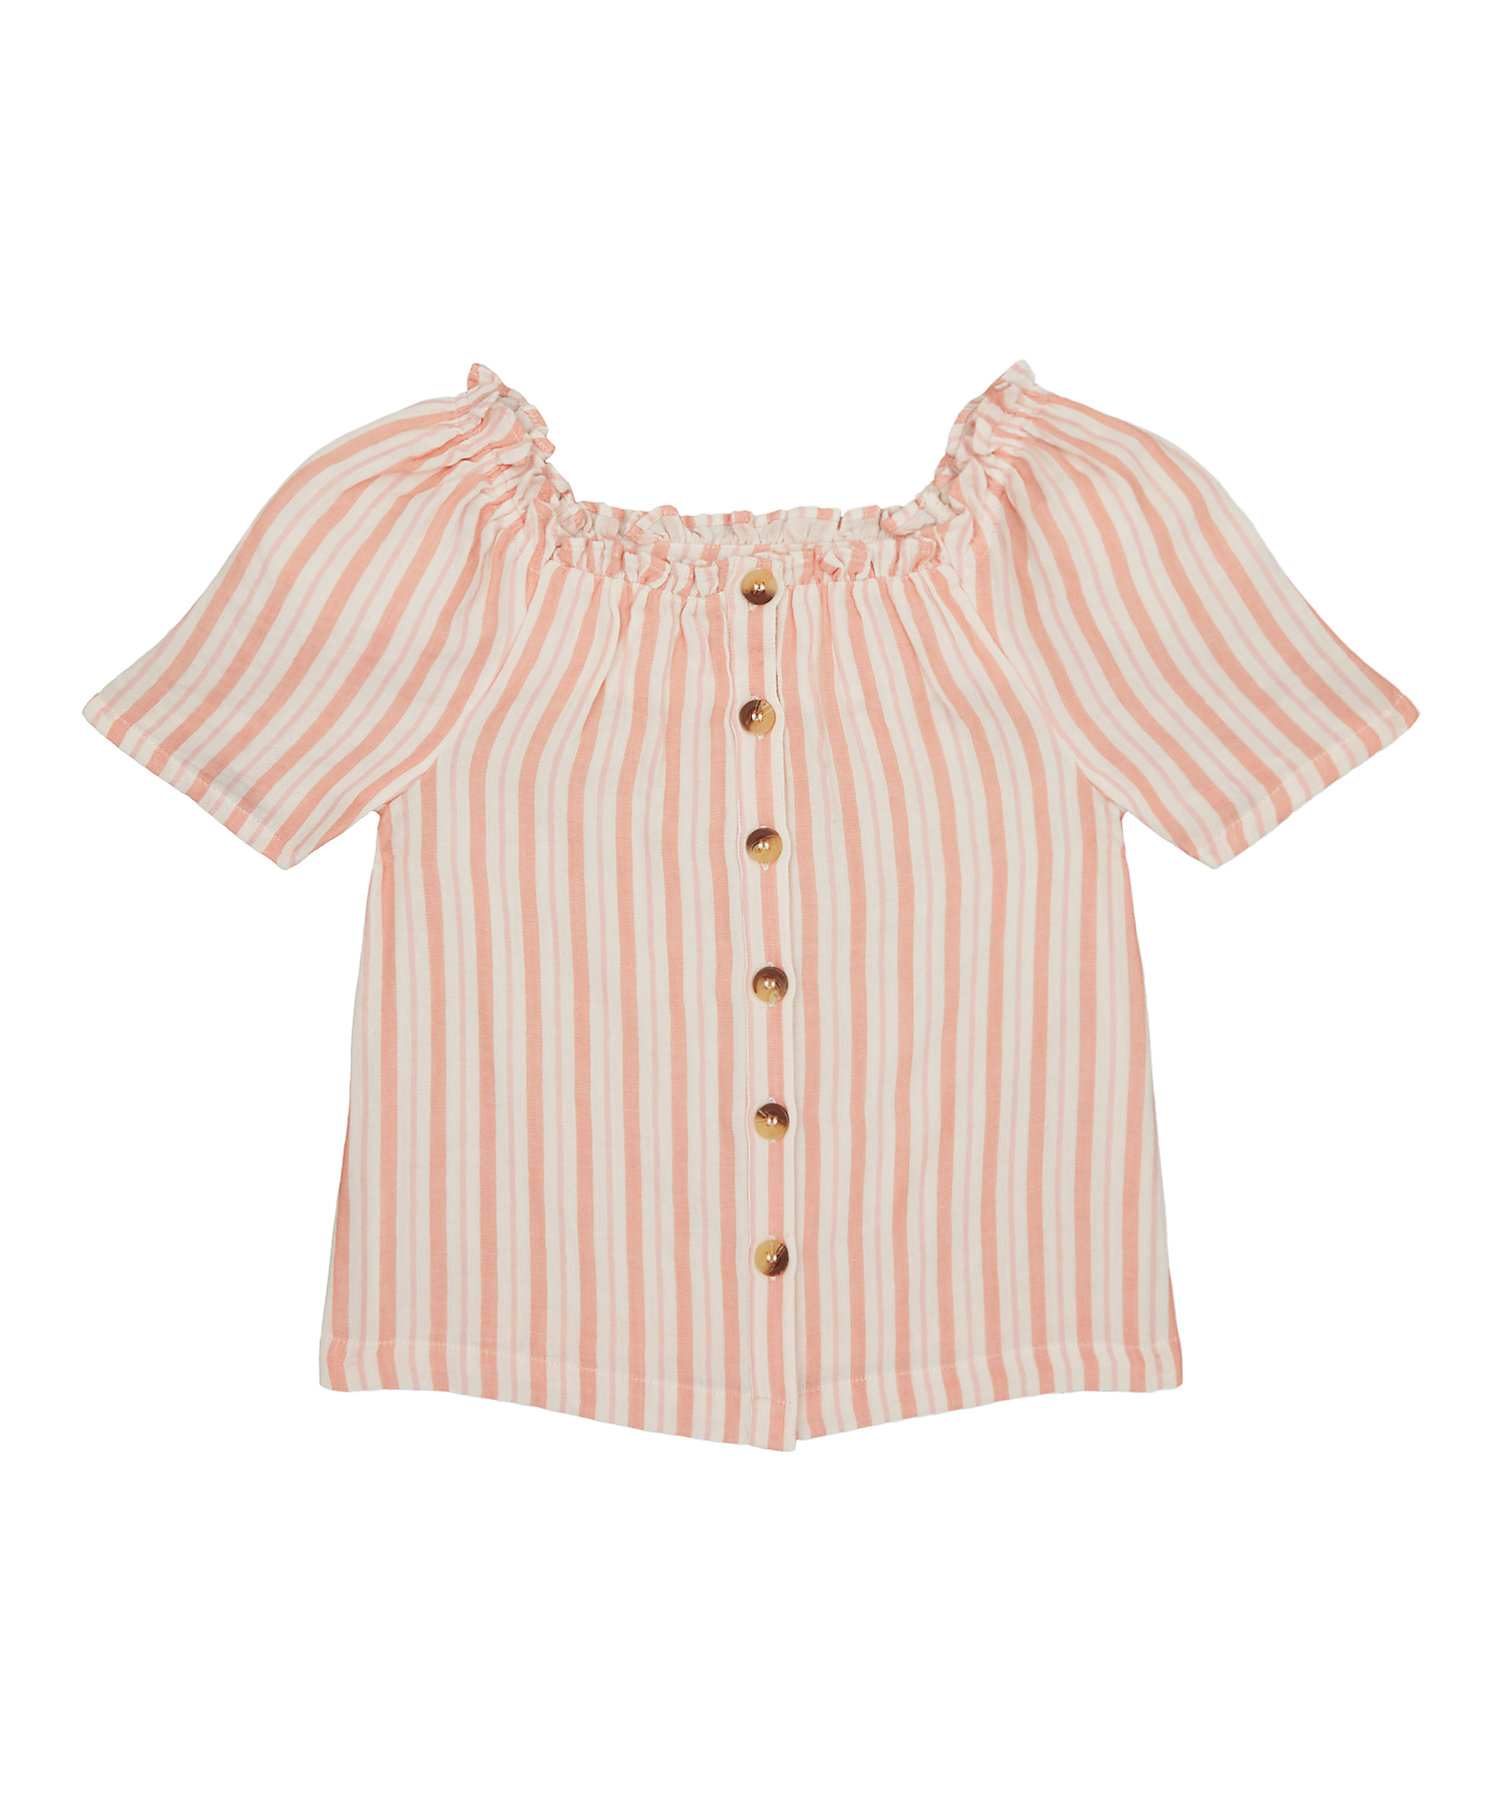 Mothercare Girls Striped Pink Top